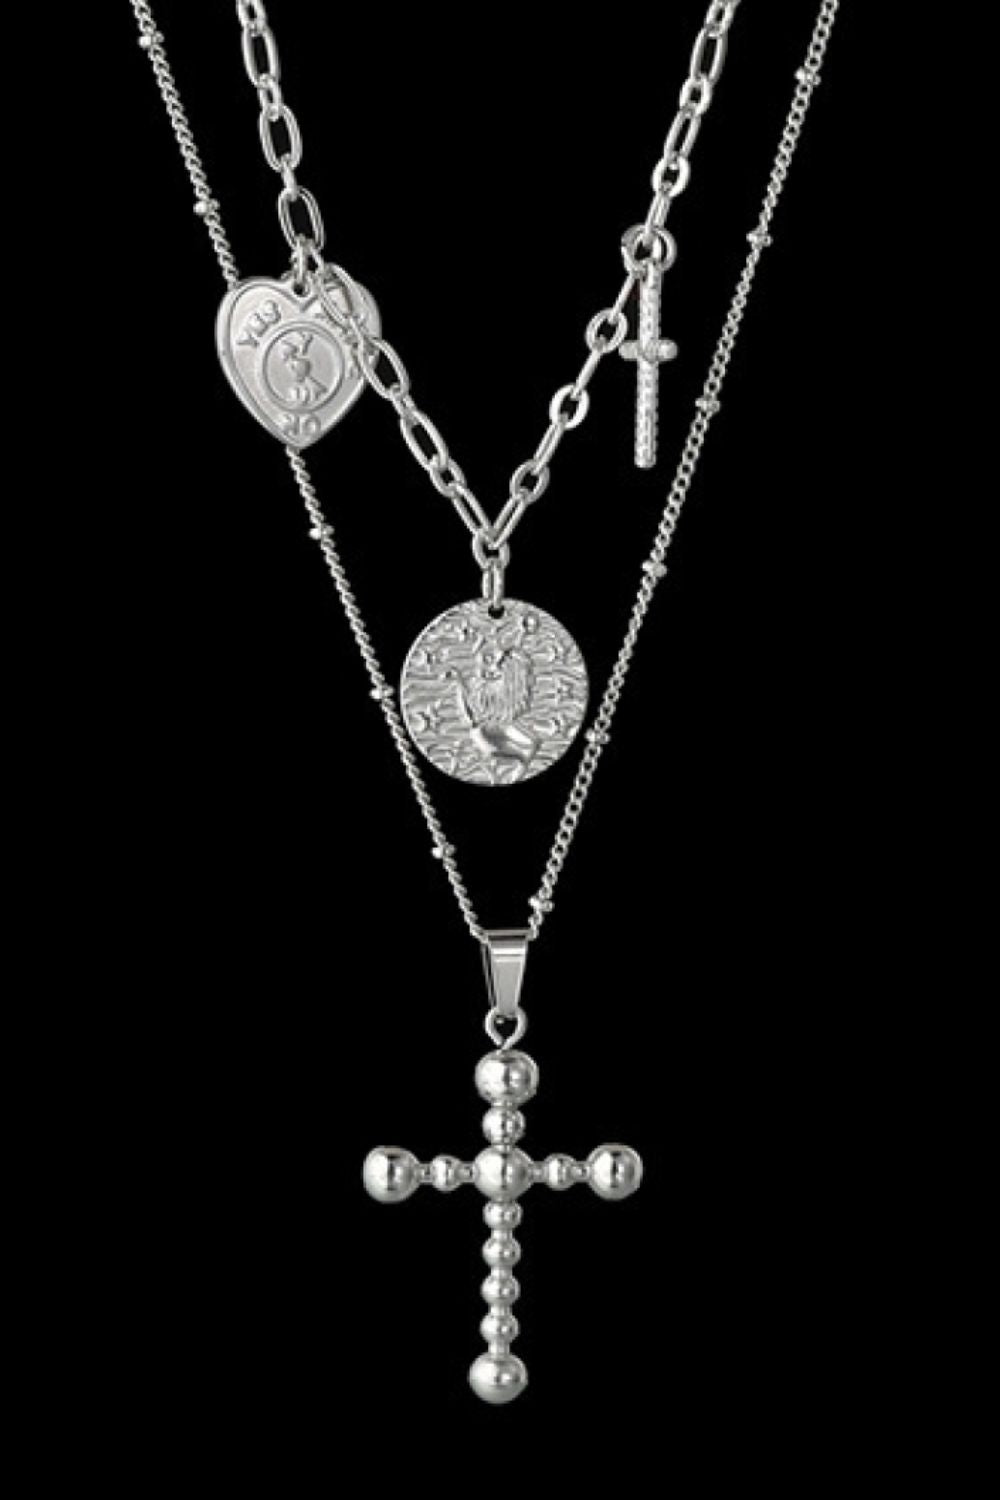 HK Stainless Steel Antique Coins & Cross Necklace